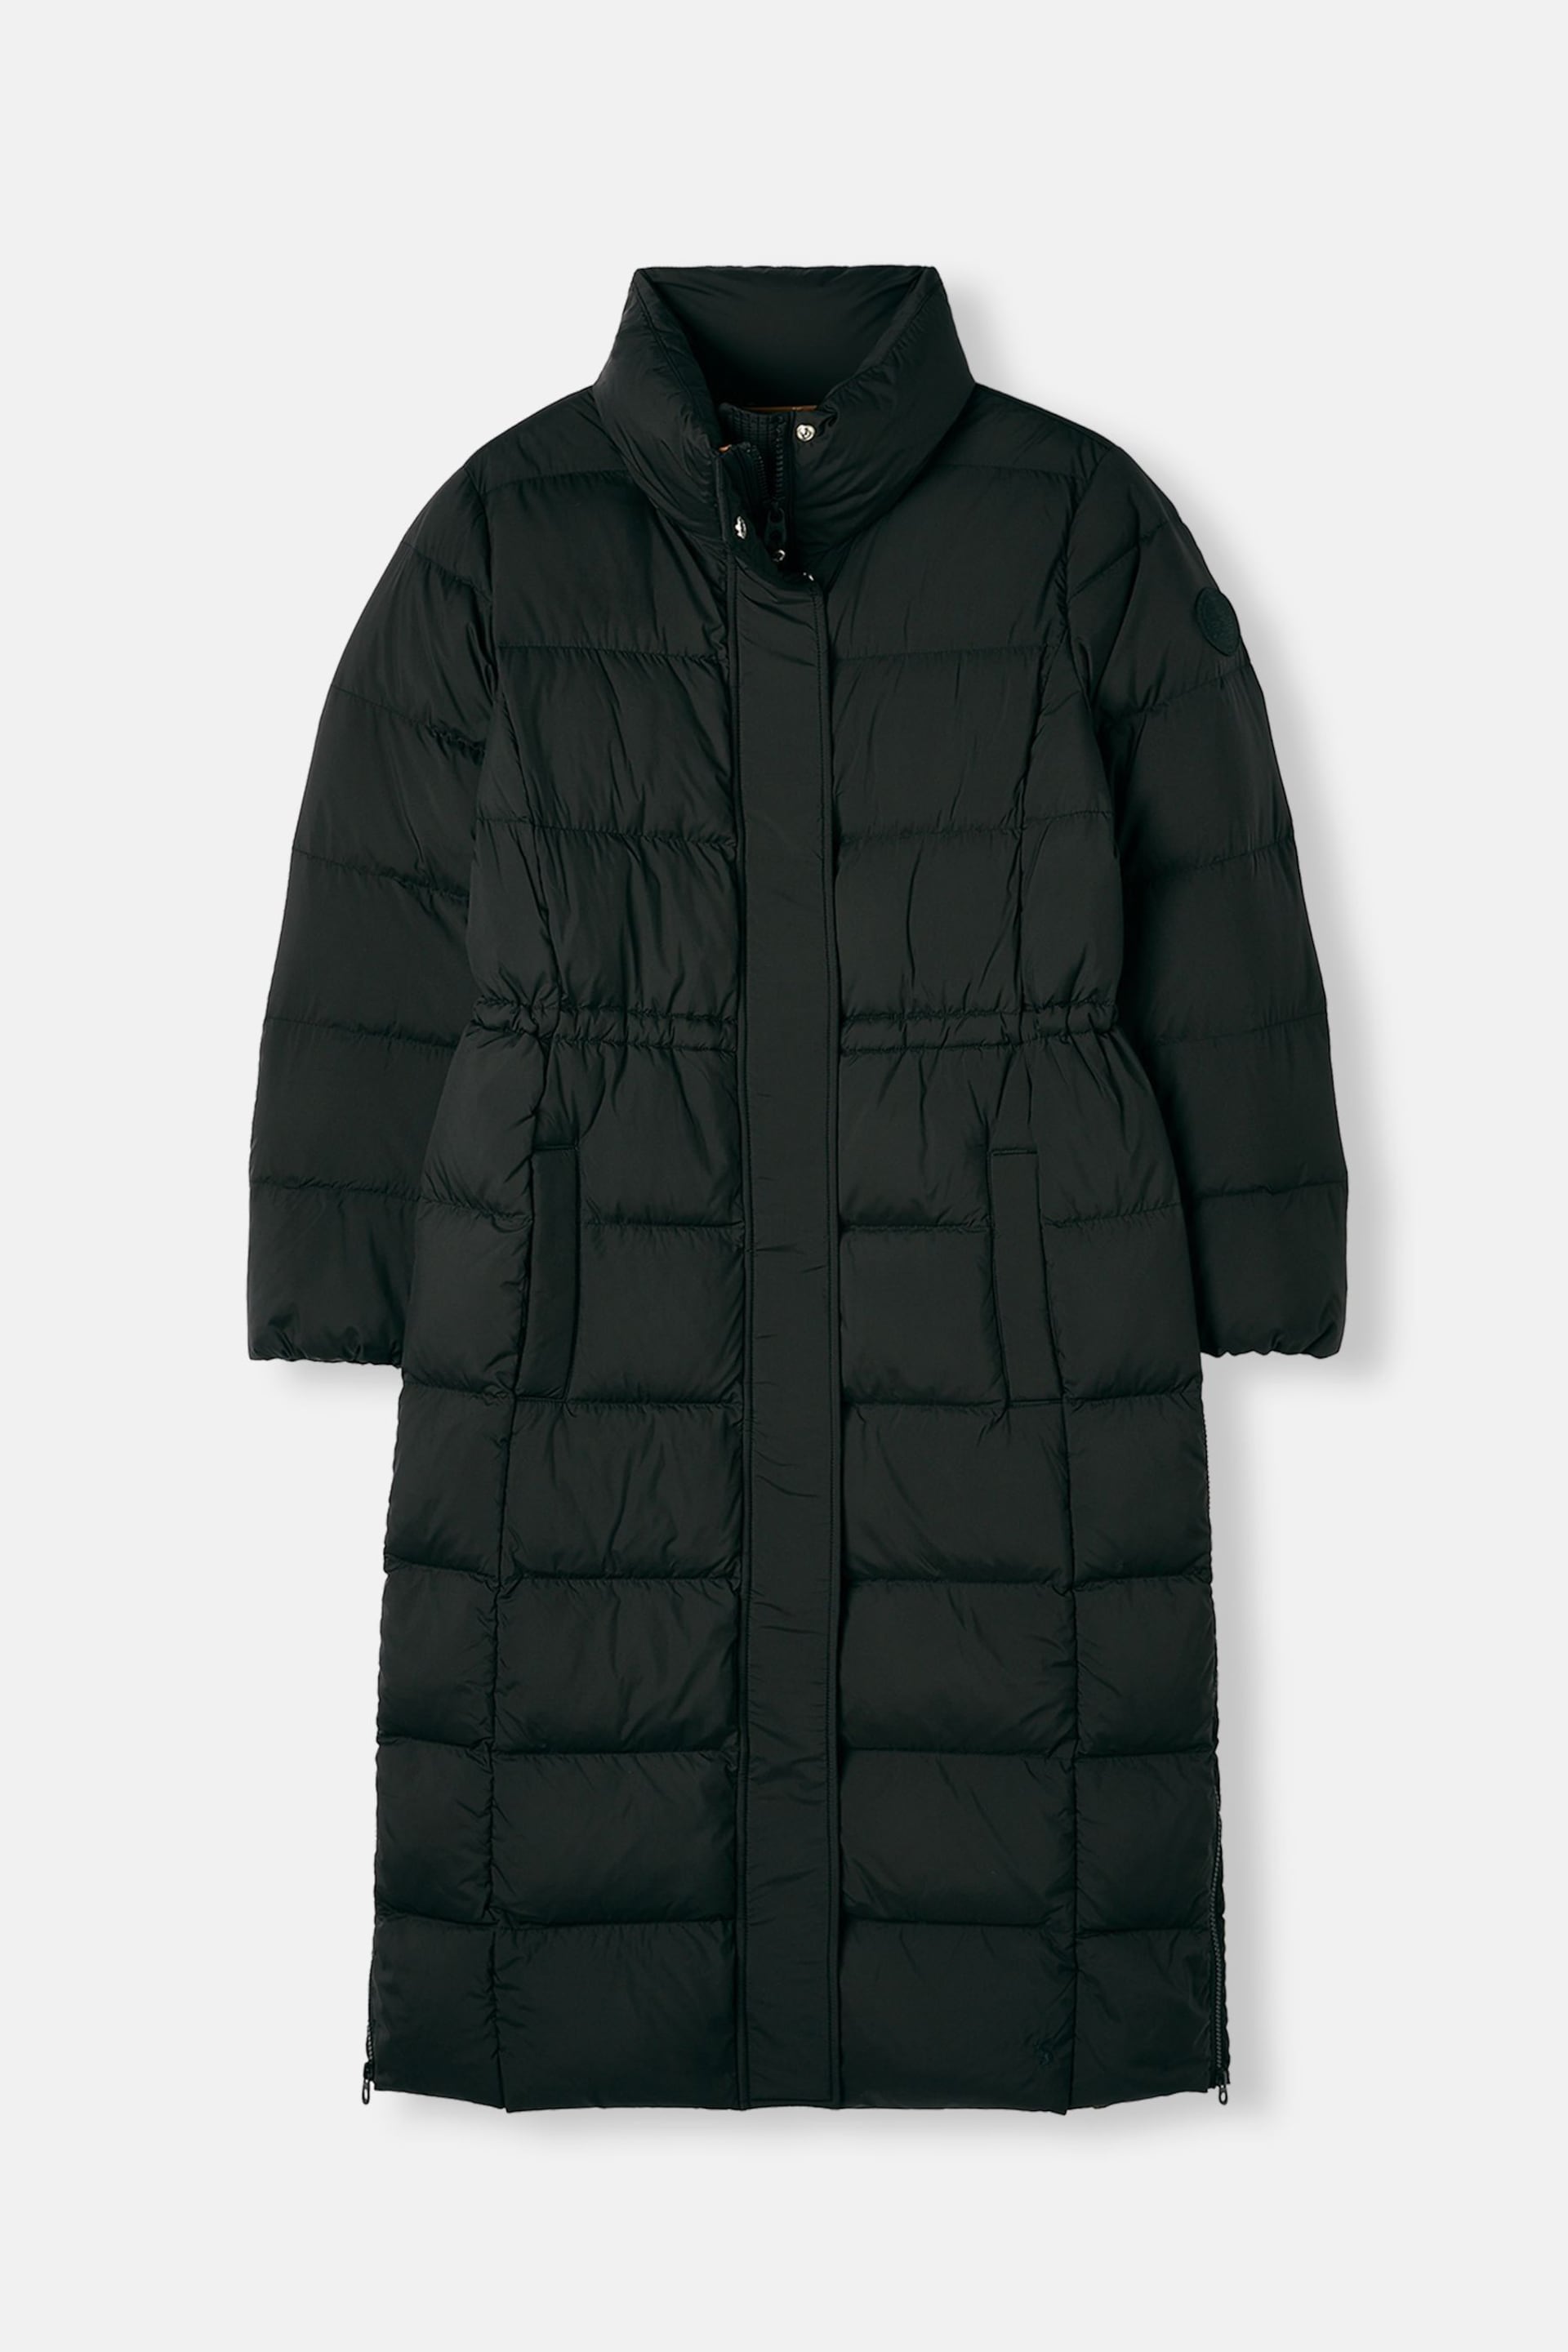 Joules Somerton Black Showerproof Down Feather Long Puffer Coat - Image 8 of 10